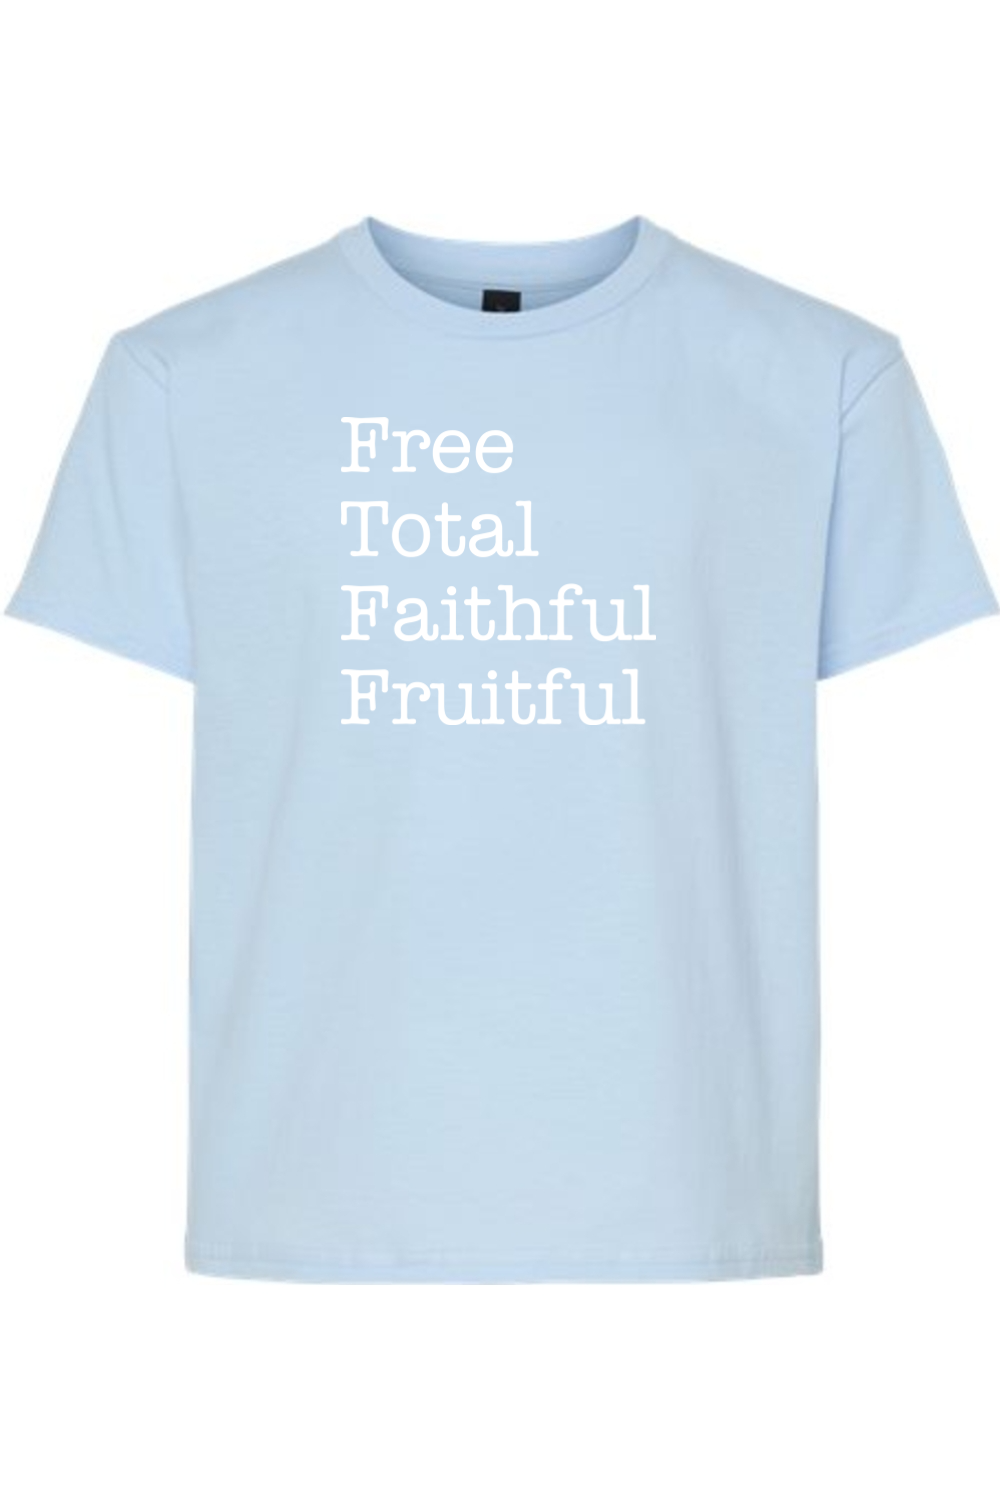 Free Total Faithful Fruitful - Theology of the Body Youth T-Shirt